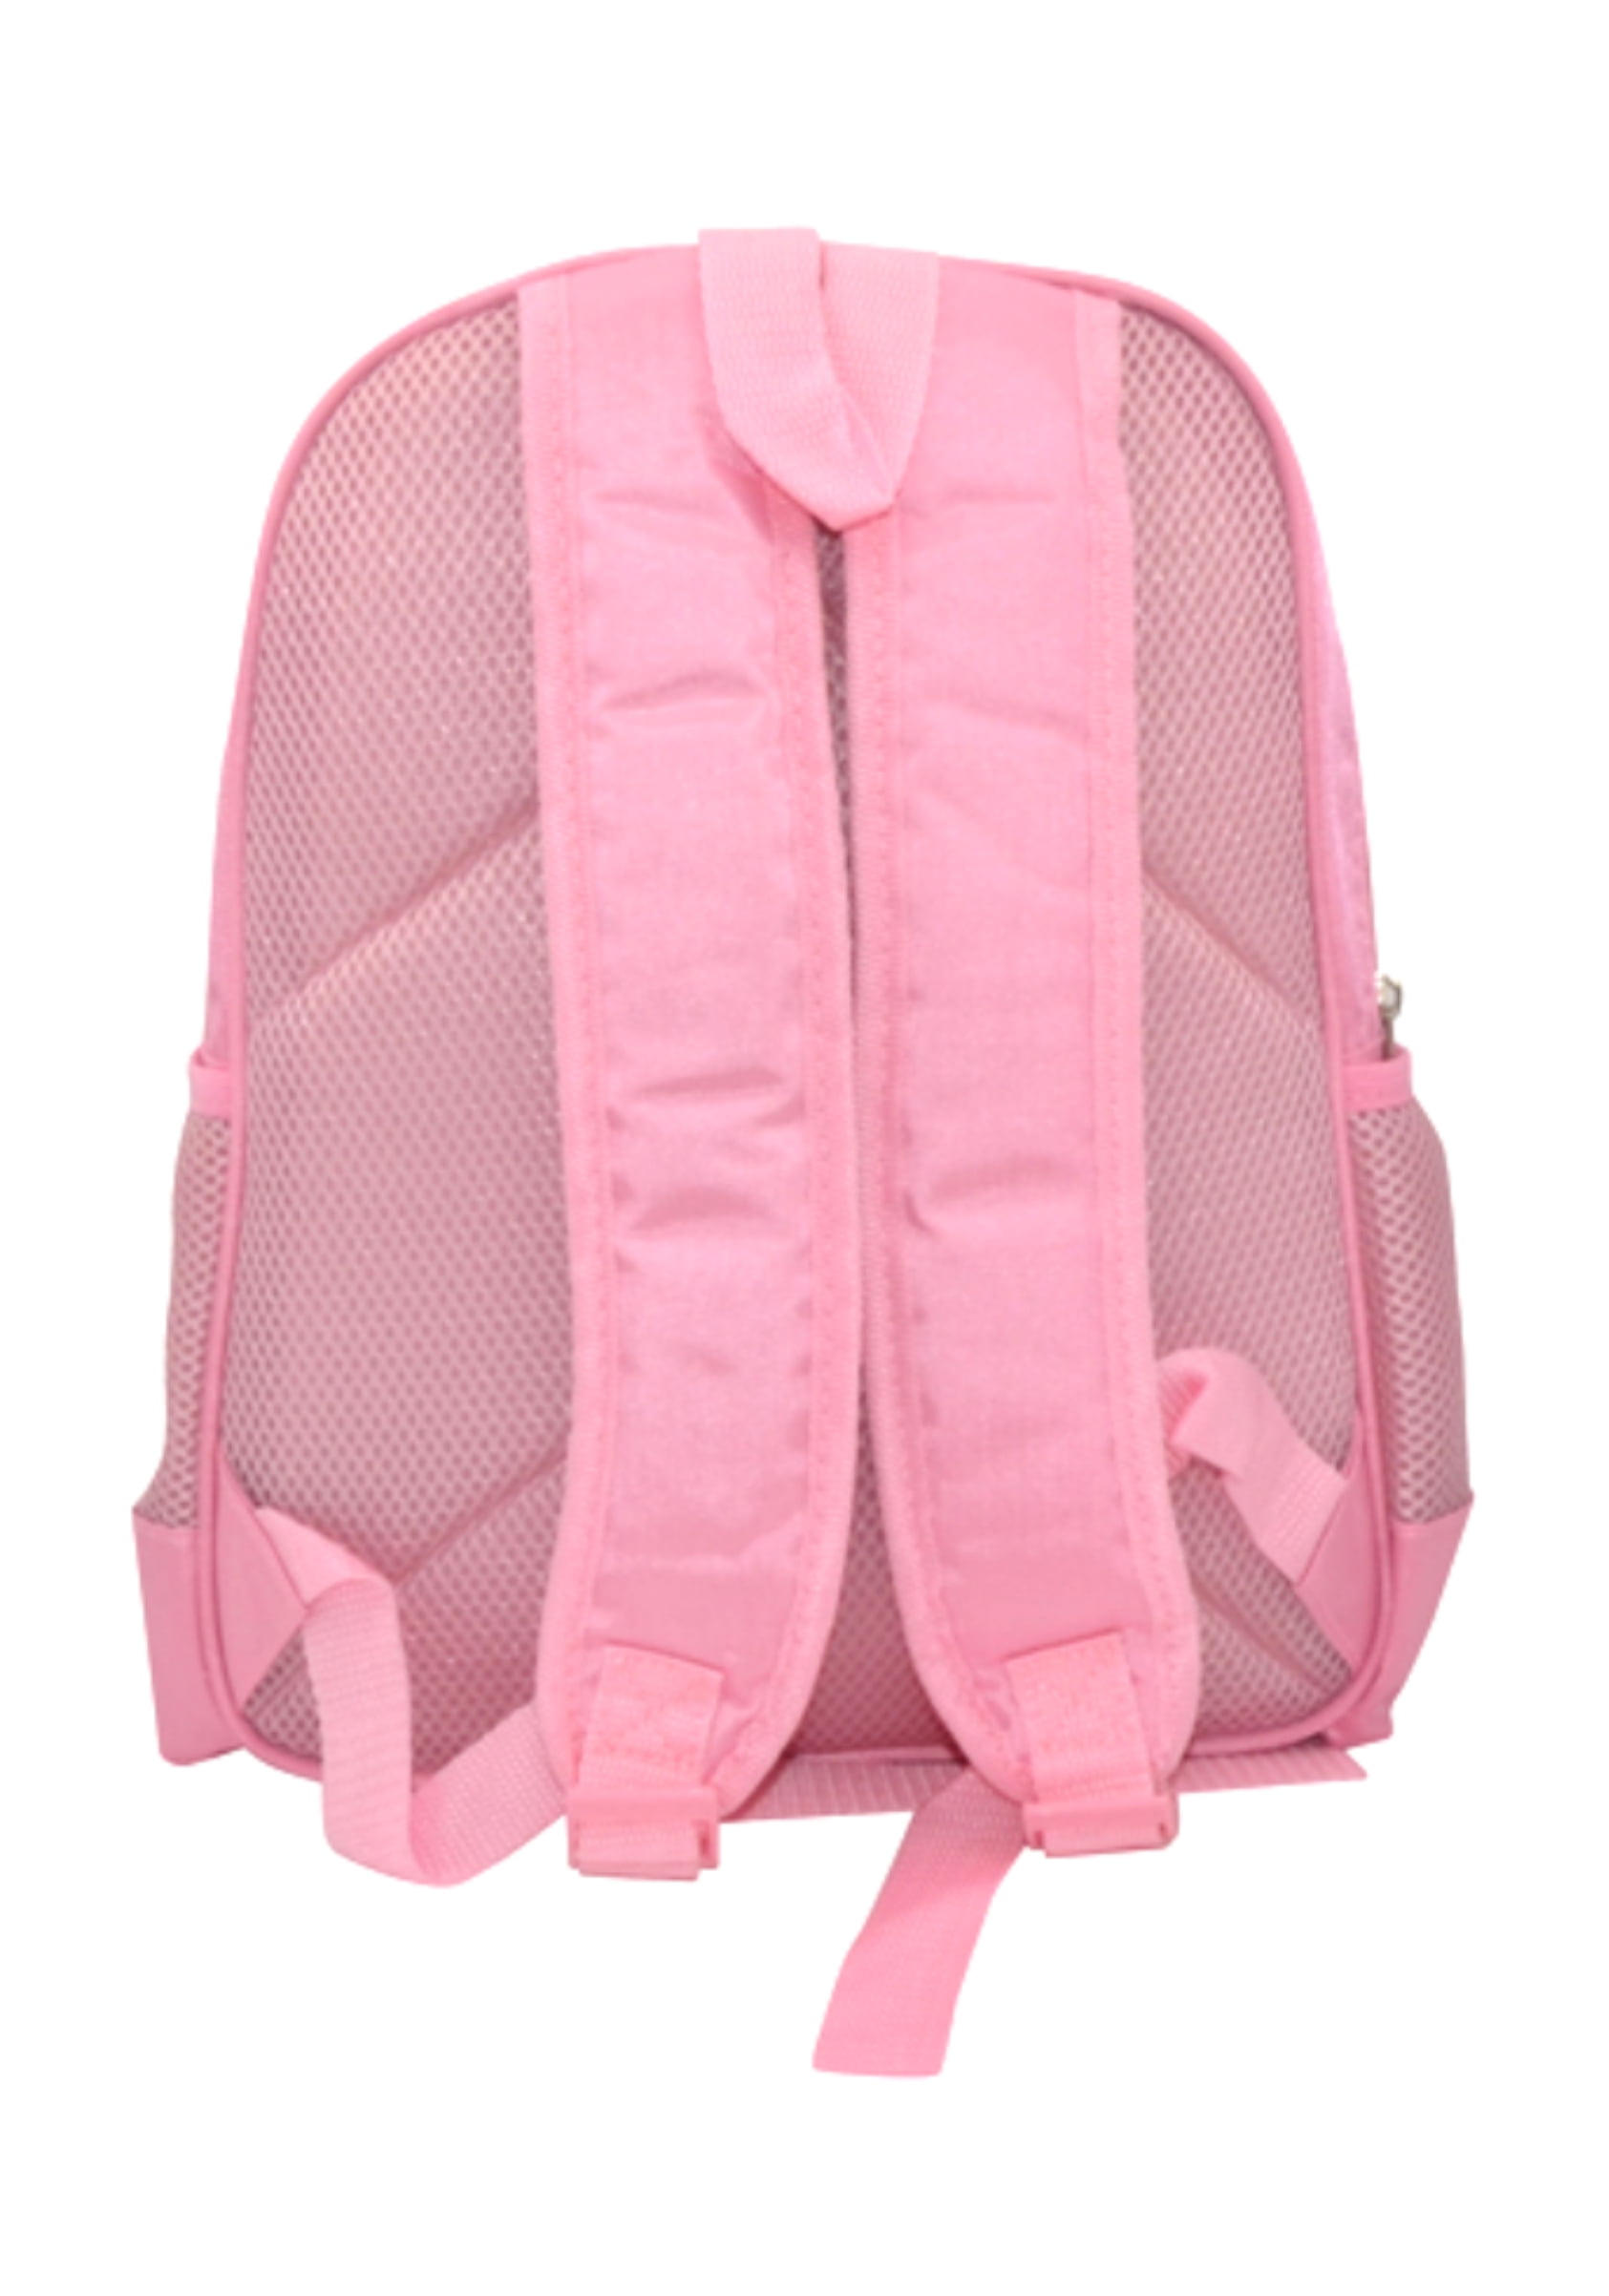 Claire's Club Mini Backpack for Girls Age 3-6 - Little Girl Purse Cute  Fashion Accessory Kids Small Backpack Toddler Preschool Bookbag - Pink  Status Icon Adjustable Straps 6W x 7.5H x 2.5D 